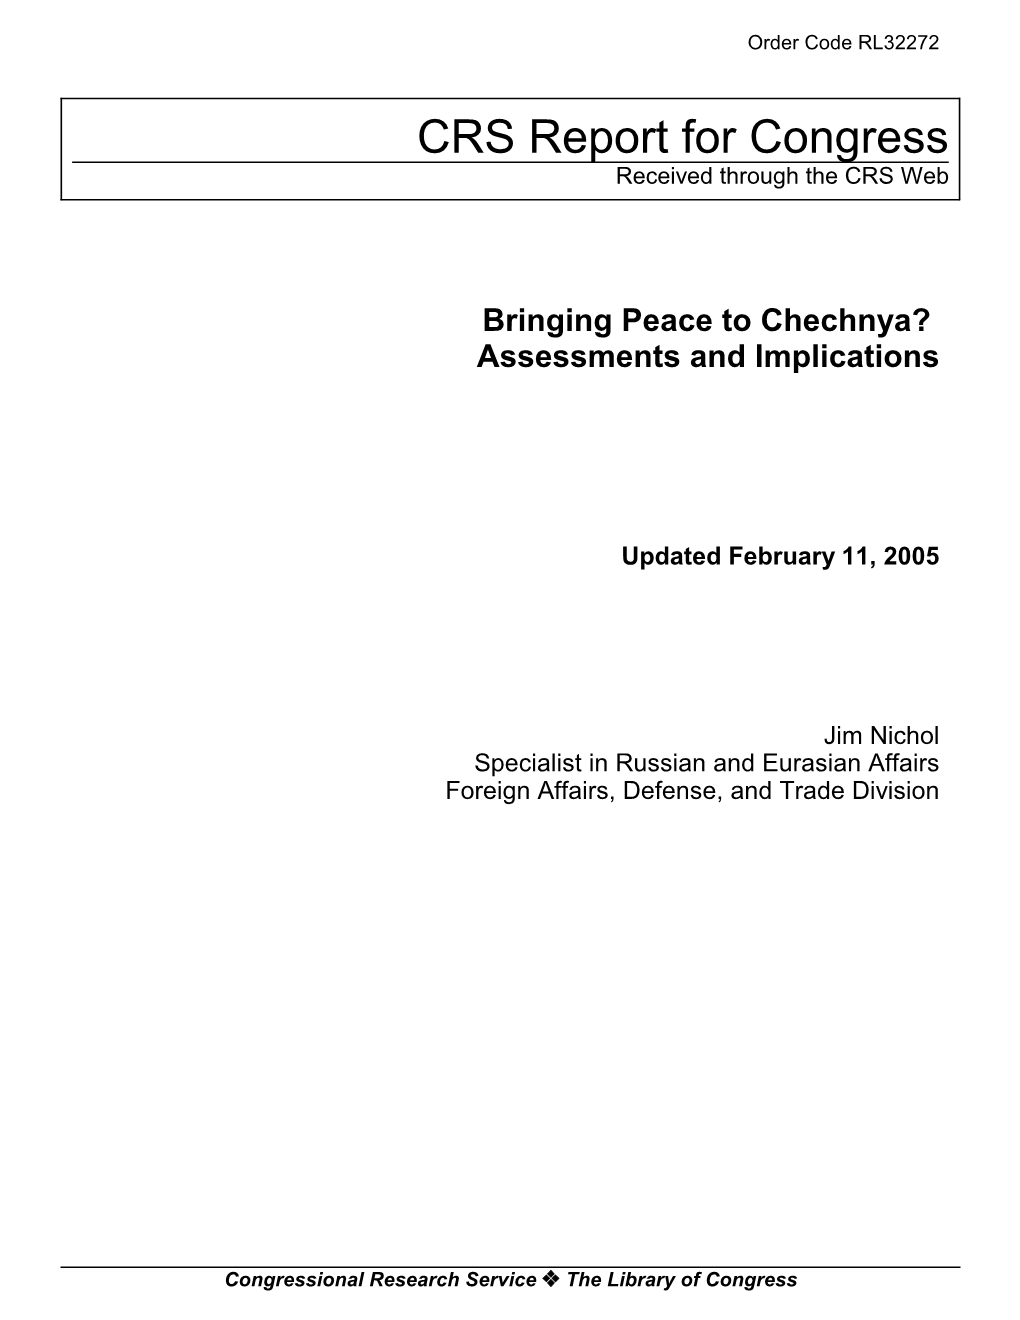 Bringing Peace to Chechnya? Assessments and Implications